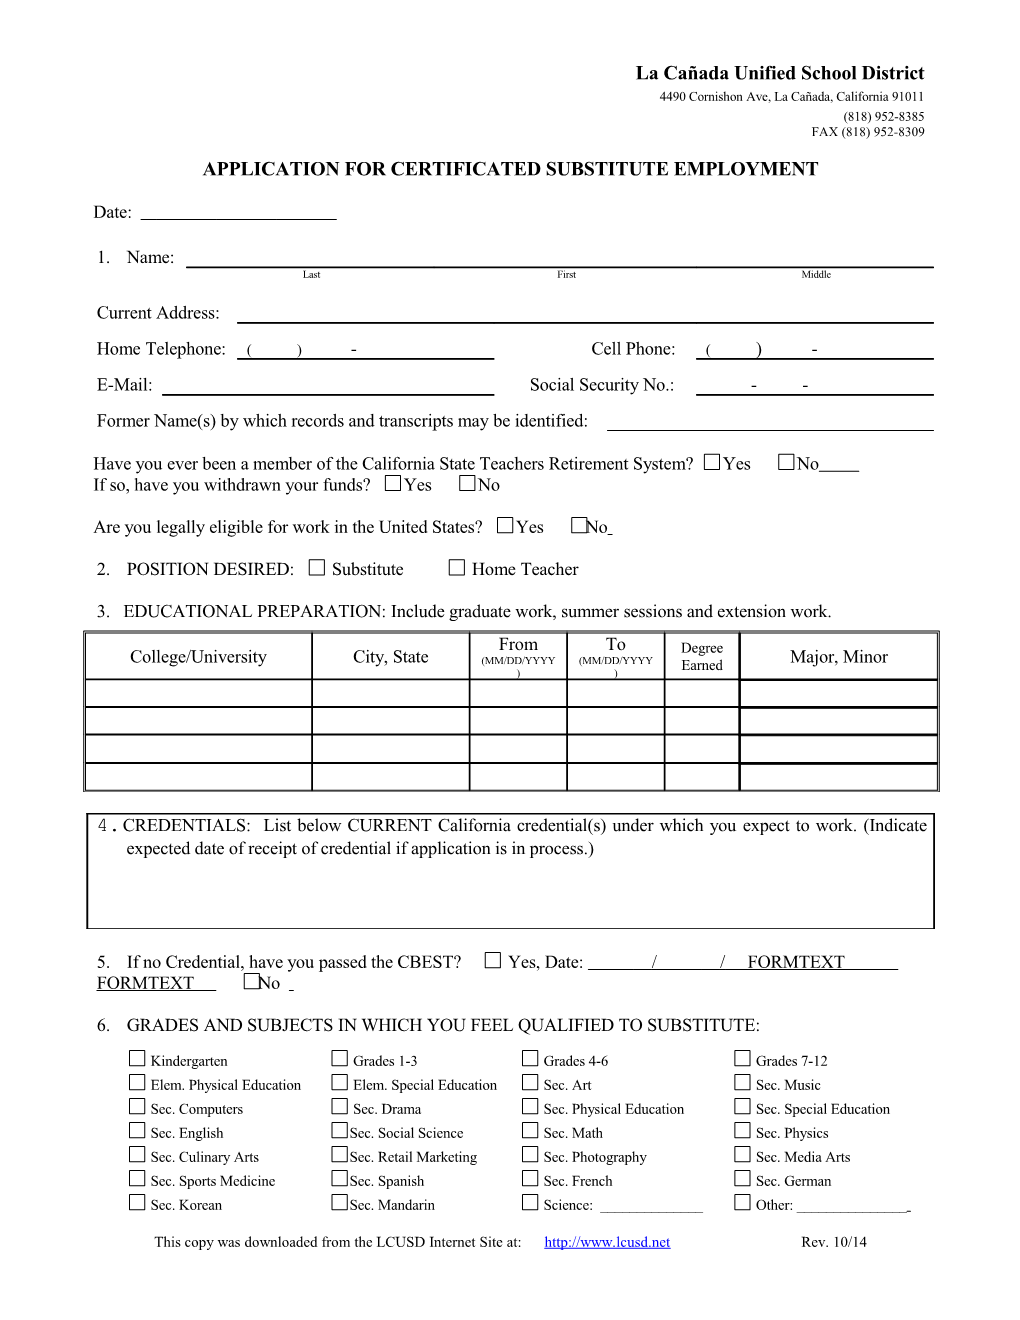 Application for Certificated Substitute Employment